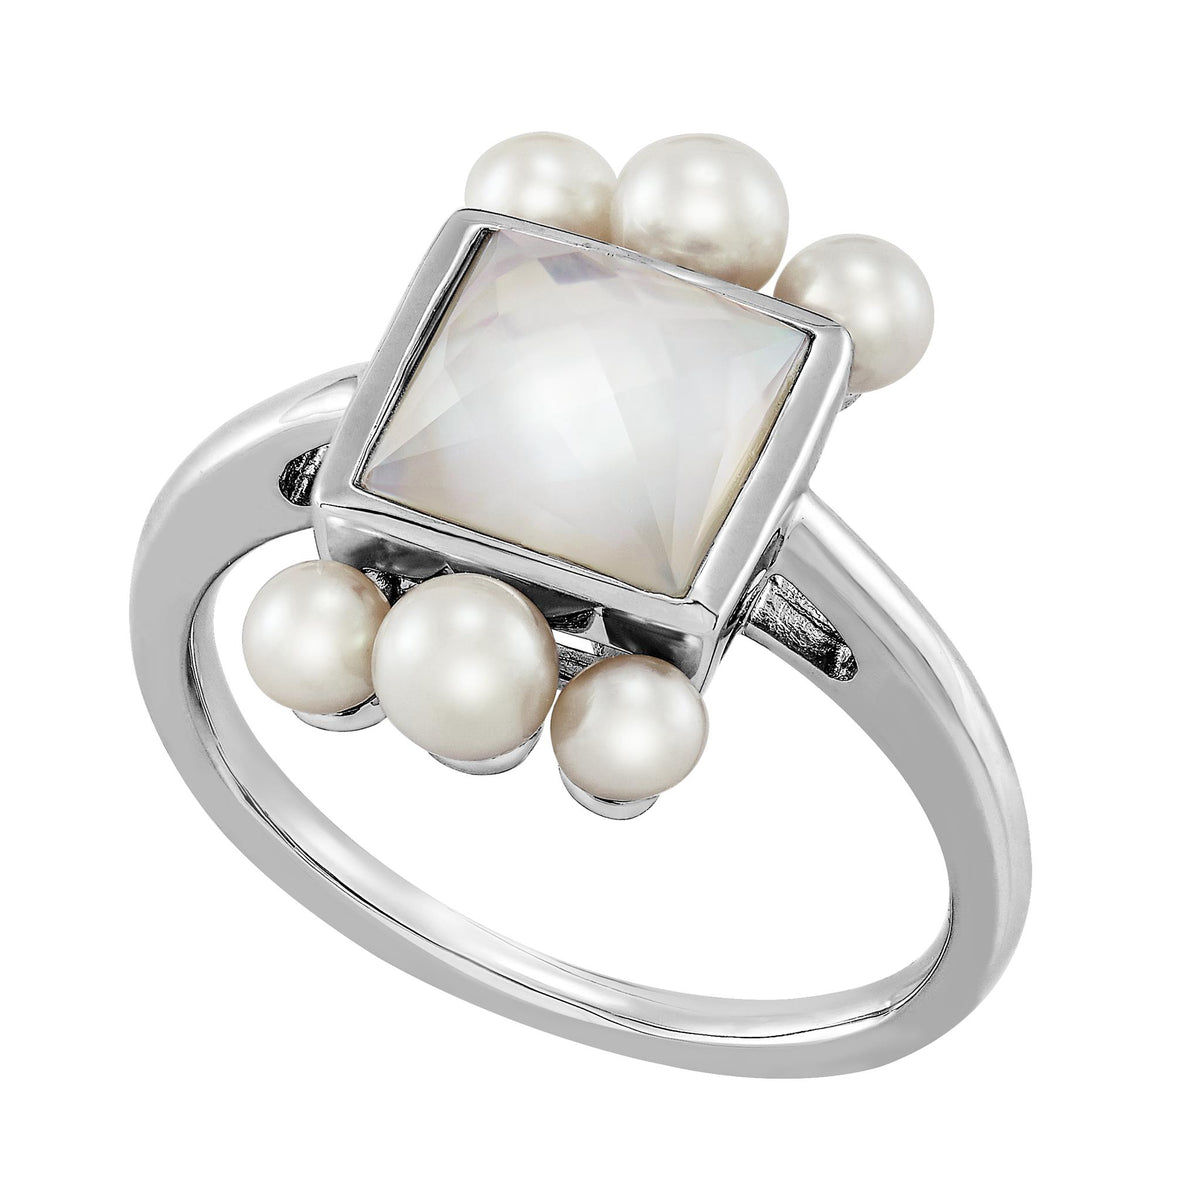 Sterling Silver Ring With Mother-Of-Pearl and Freshwater Pearls